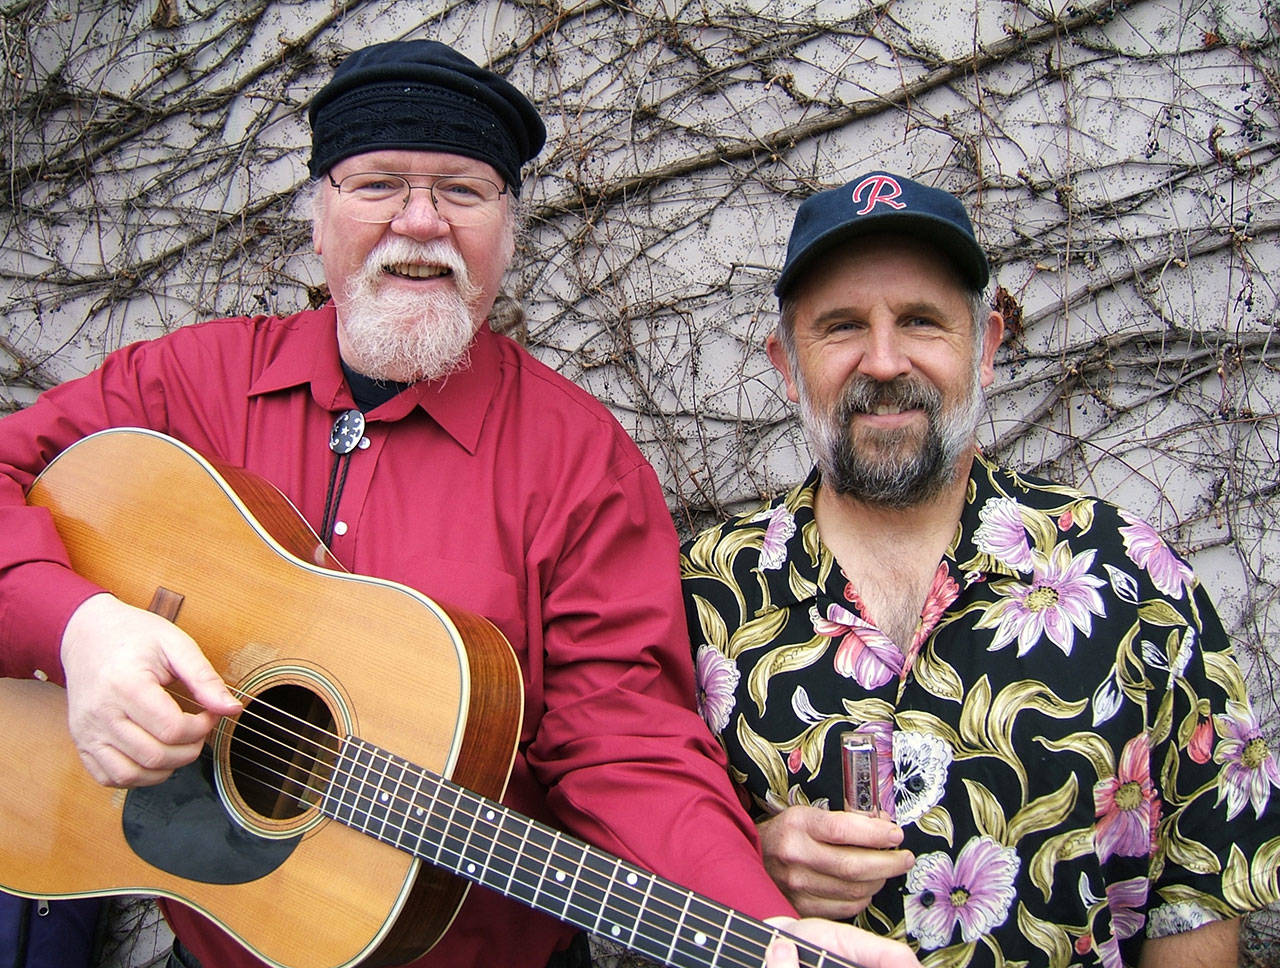 Mark Graham and Orville Johnson, who call themselves The Kings of Mongrel Folk, will play at the second annual Home 2 Vashon benefit on Oct. 19 (Courtesy Photo).